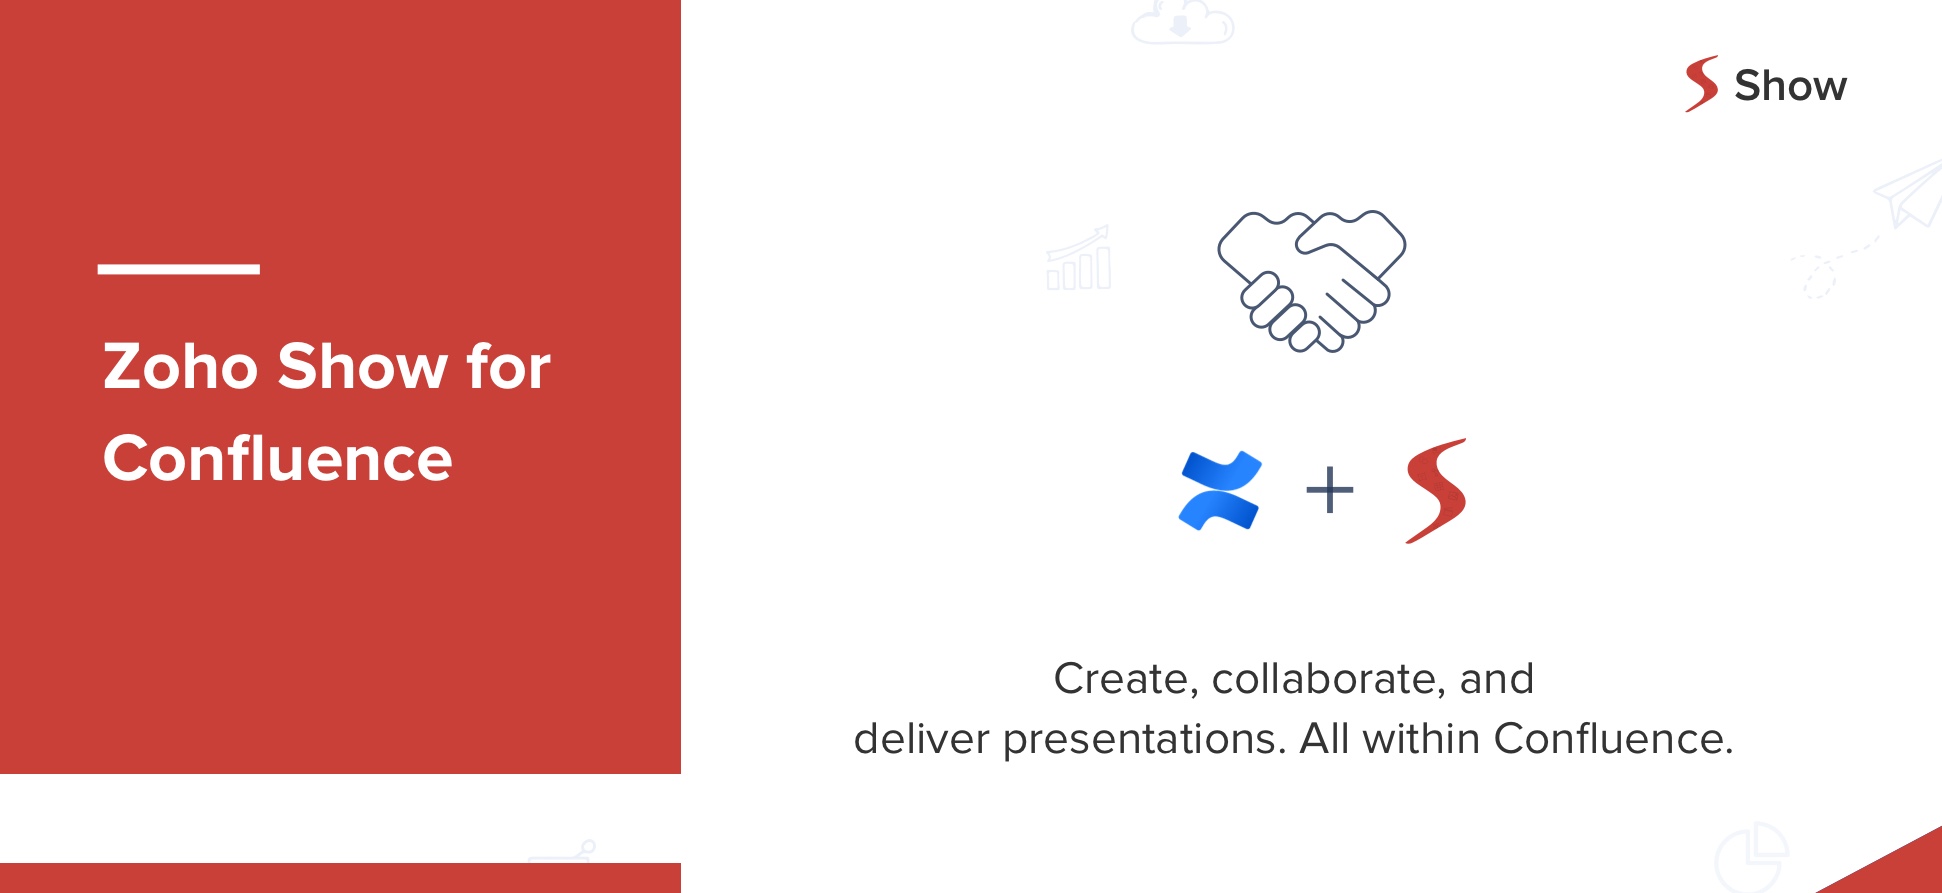 A match made in the cloud - Introducing Zoho Show for Confluence.